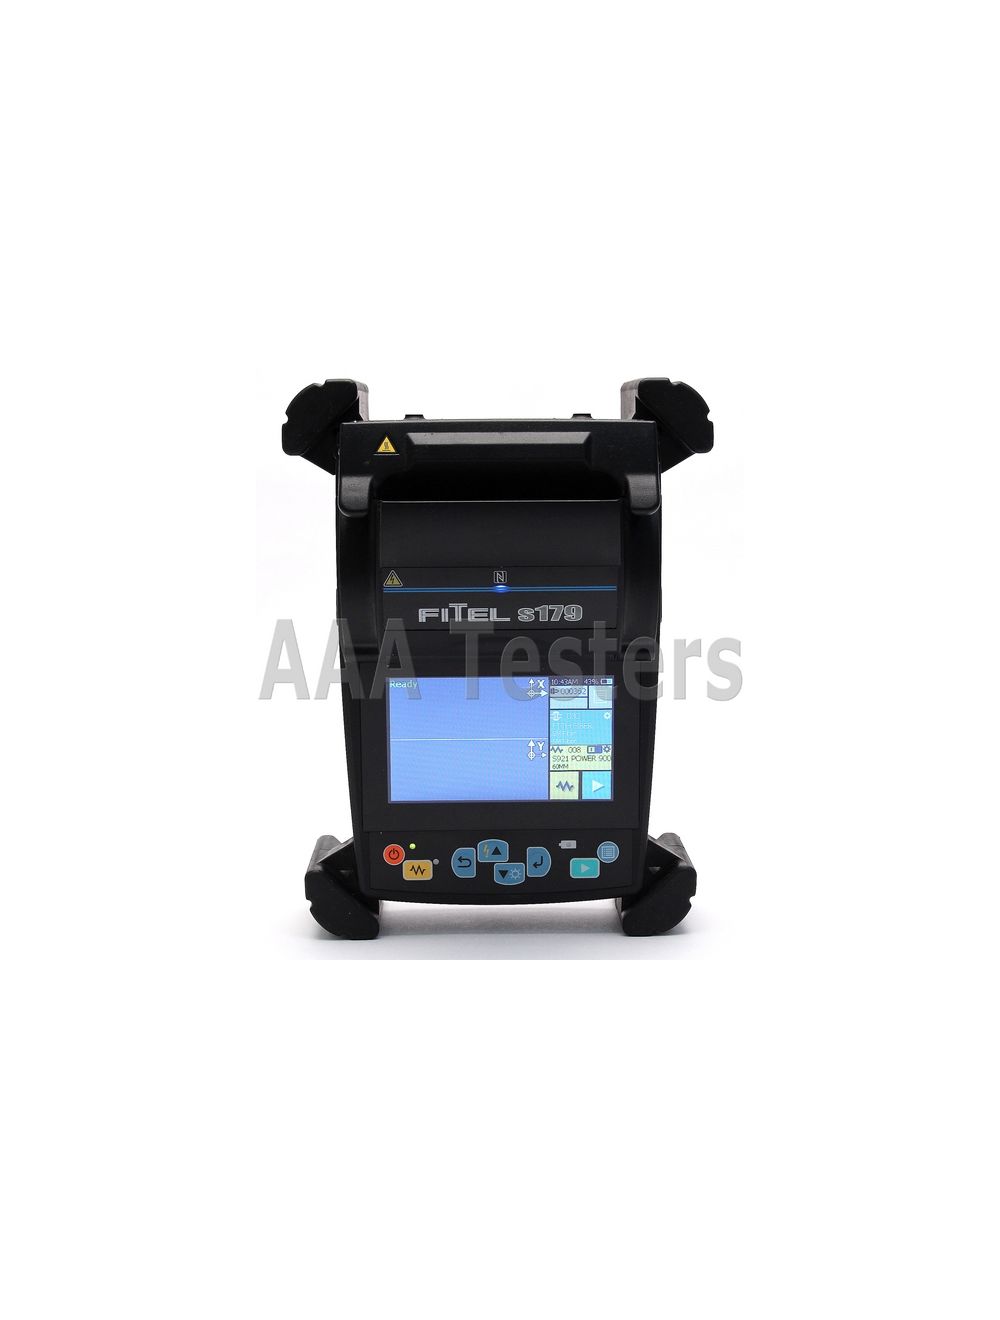 Electric Fusion Splicer S179A